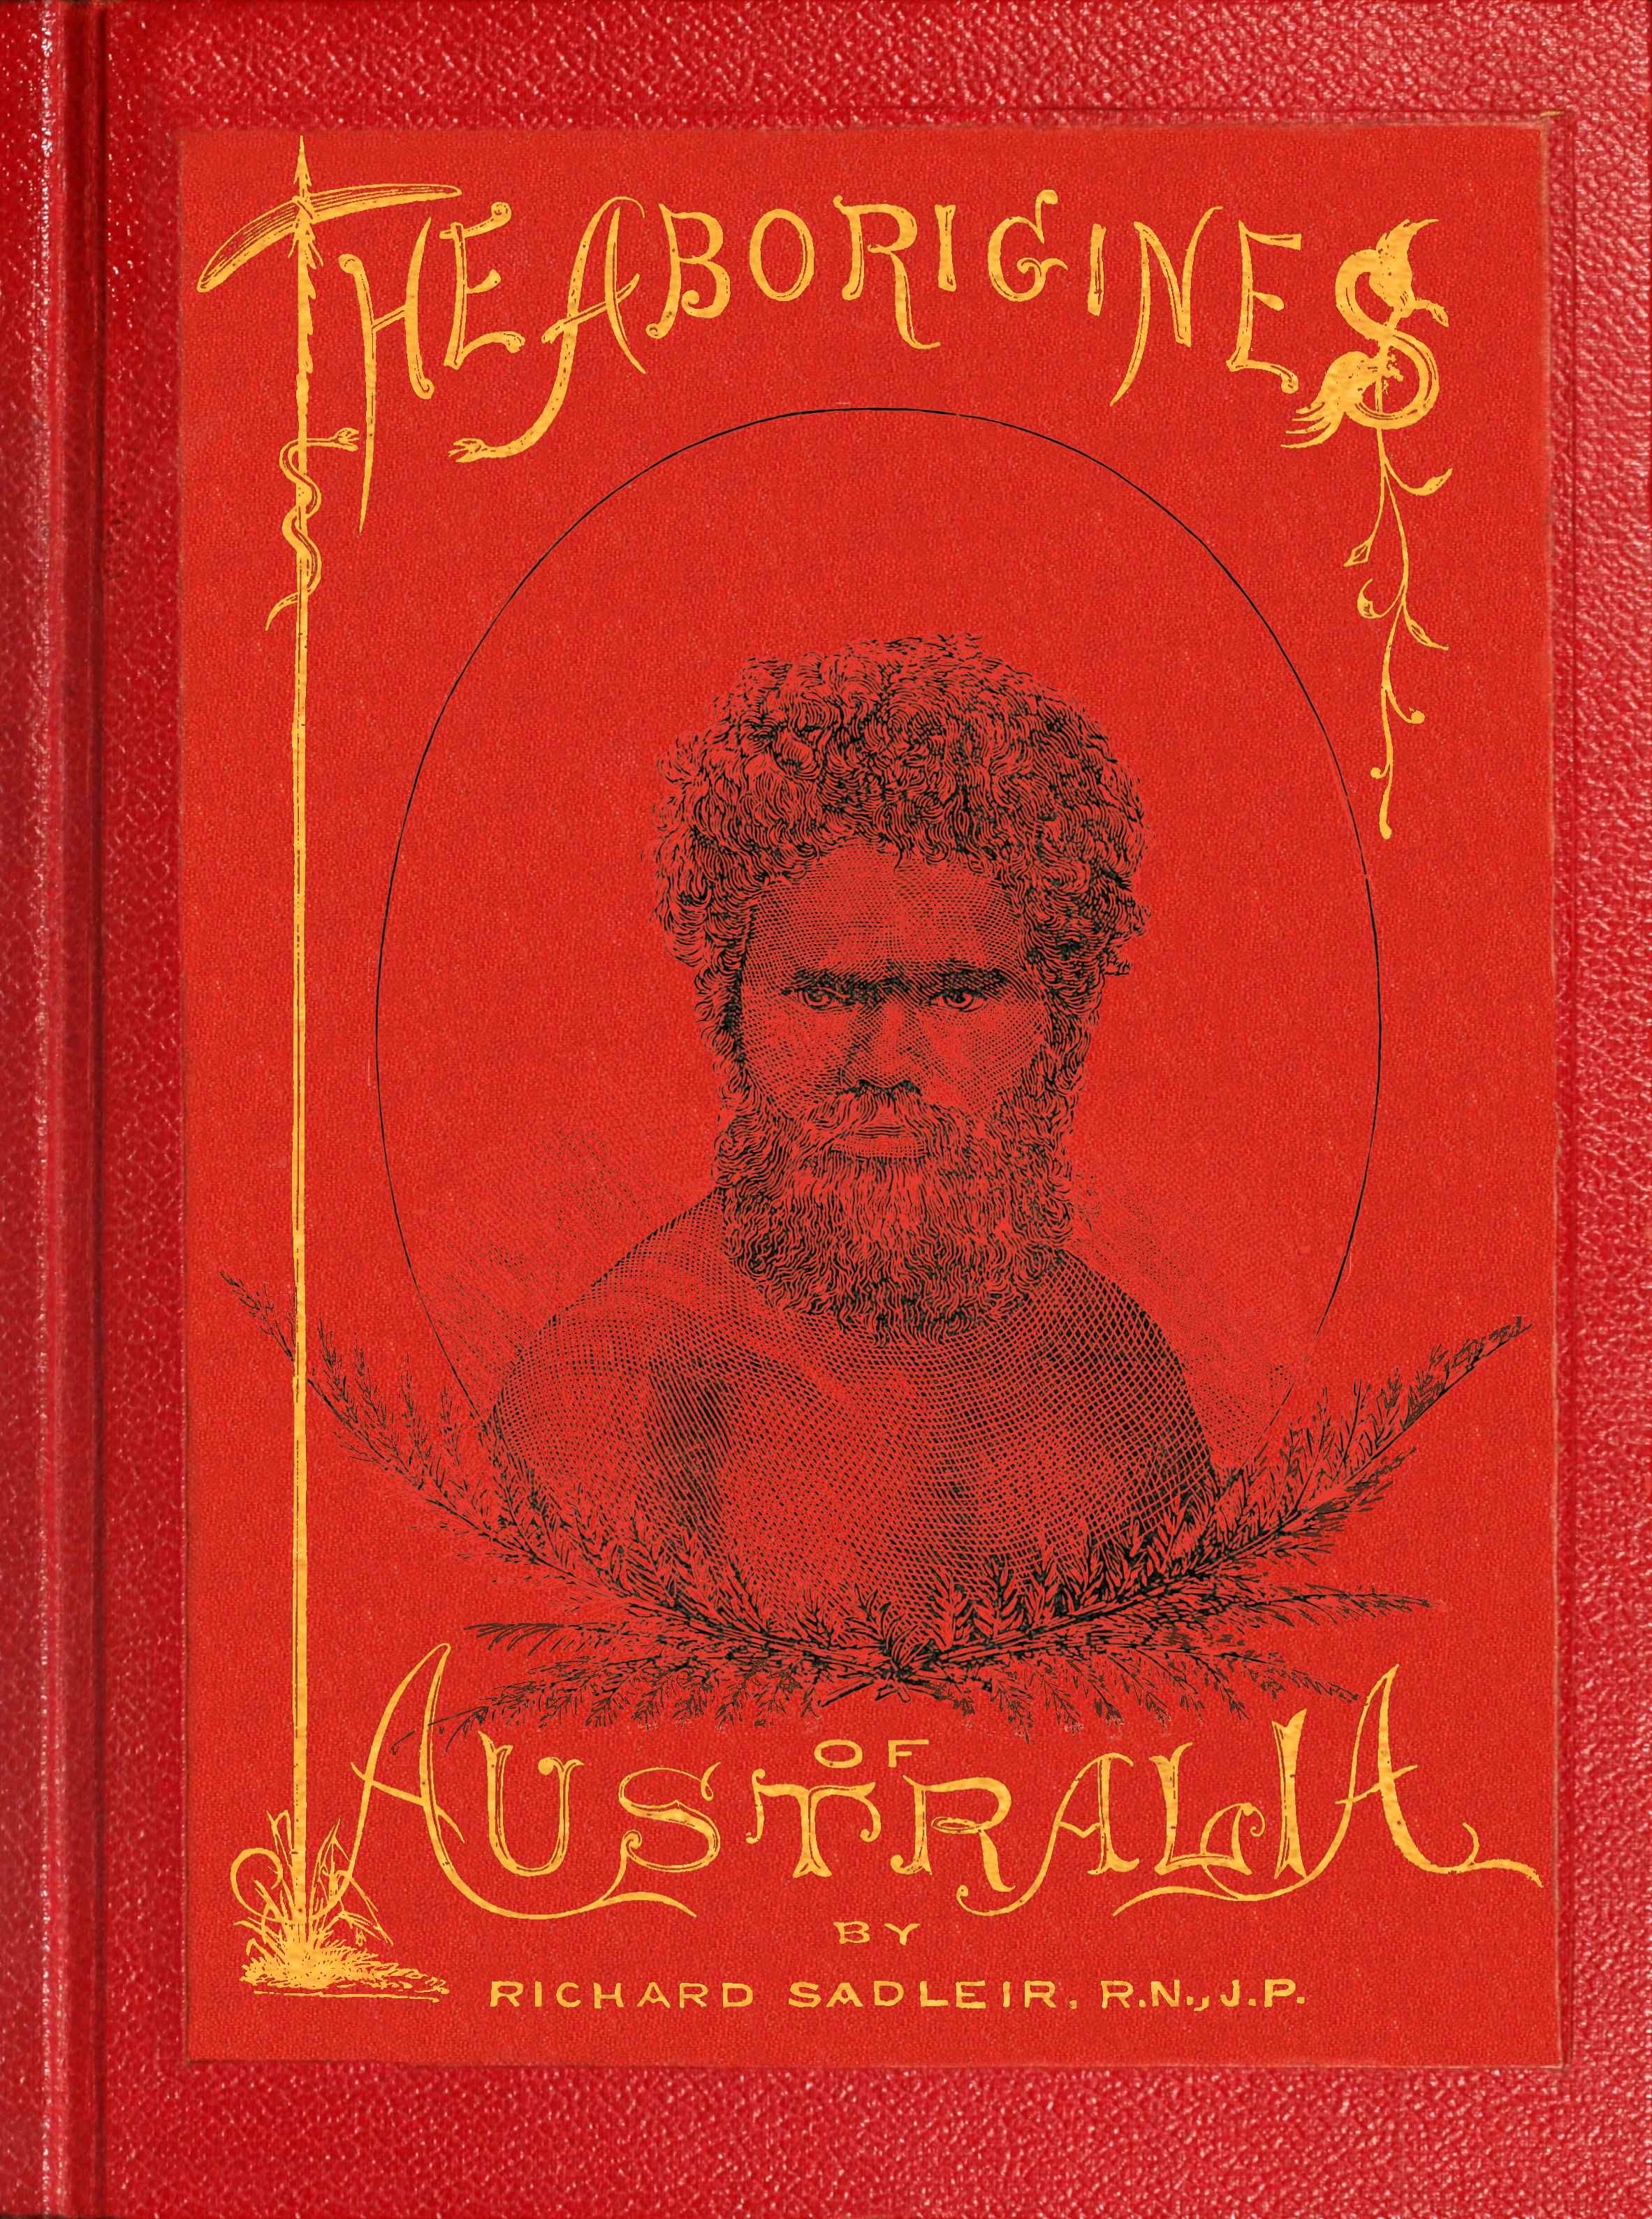 The Aborigines of Australia, by Richard Sadleir—A Project Gutenberg eBook pic image